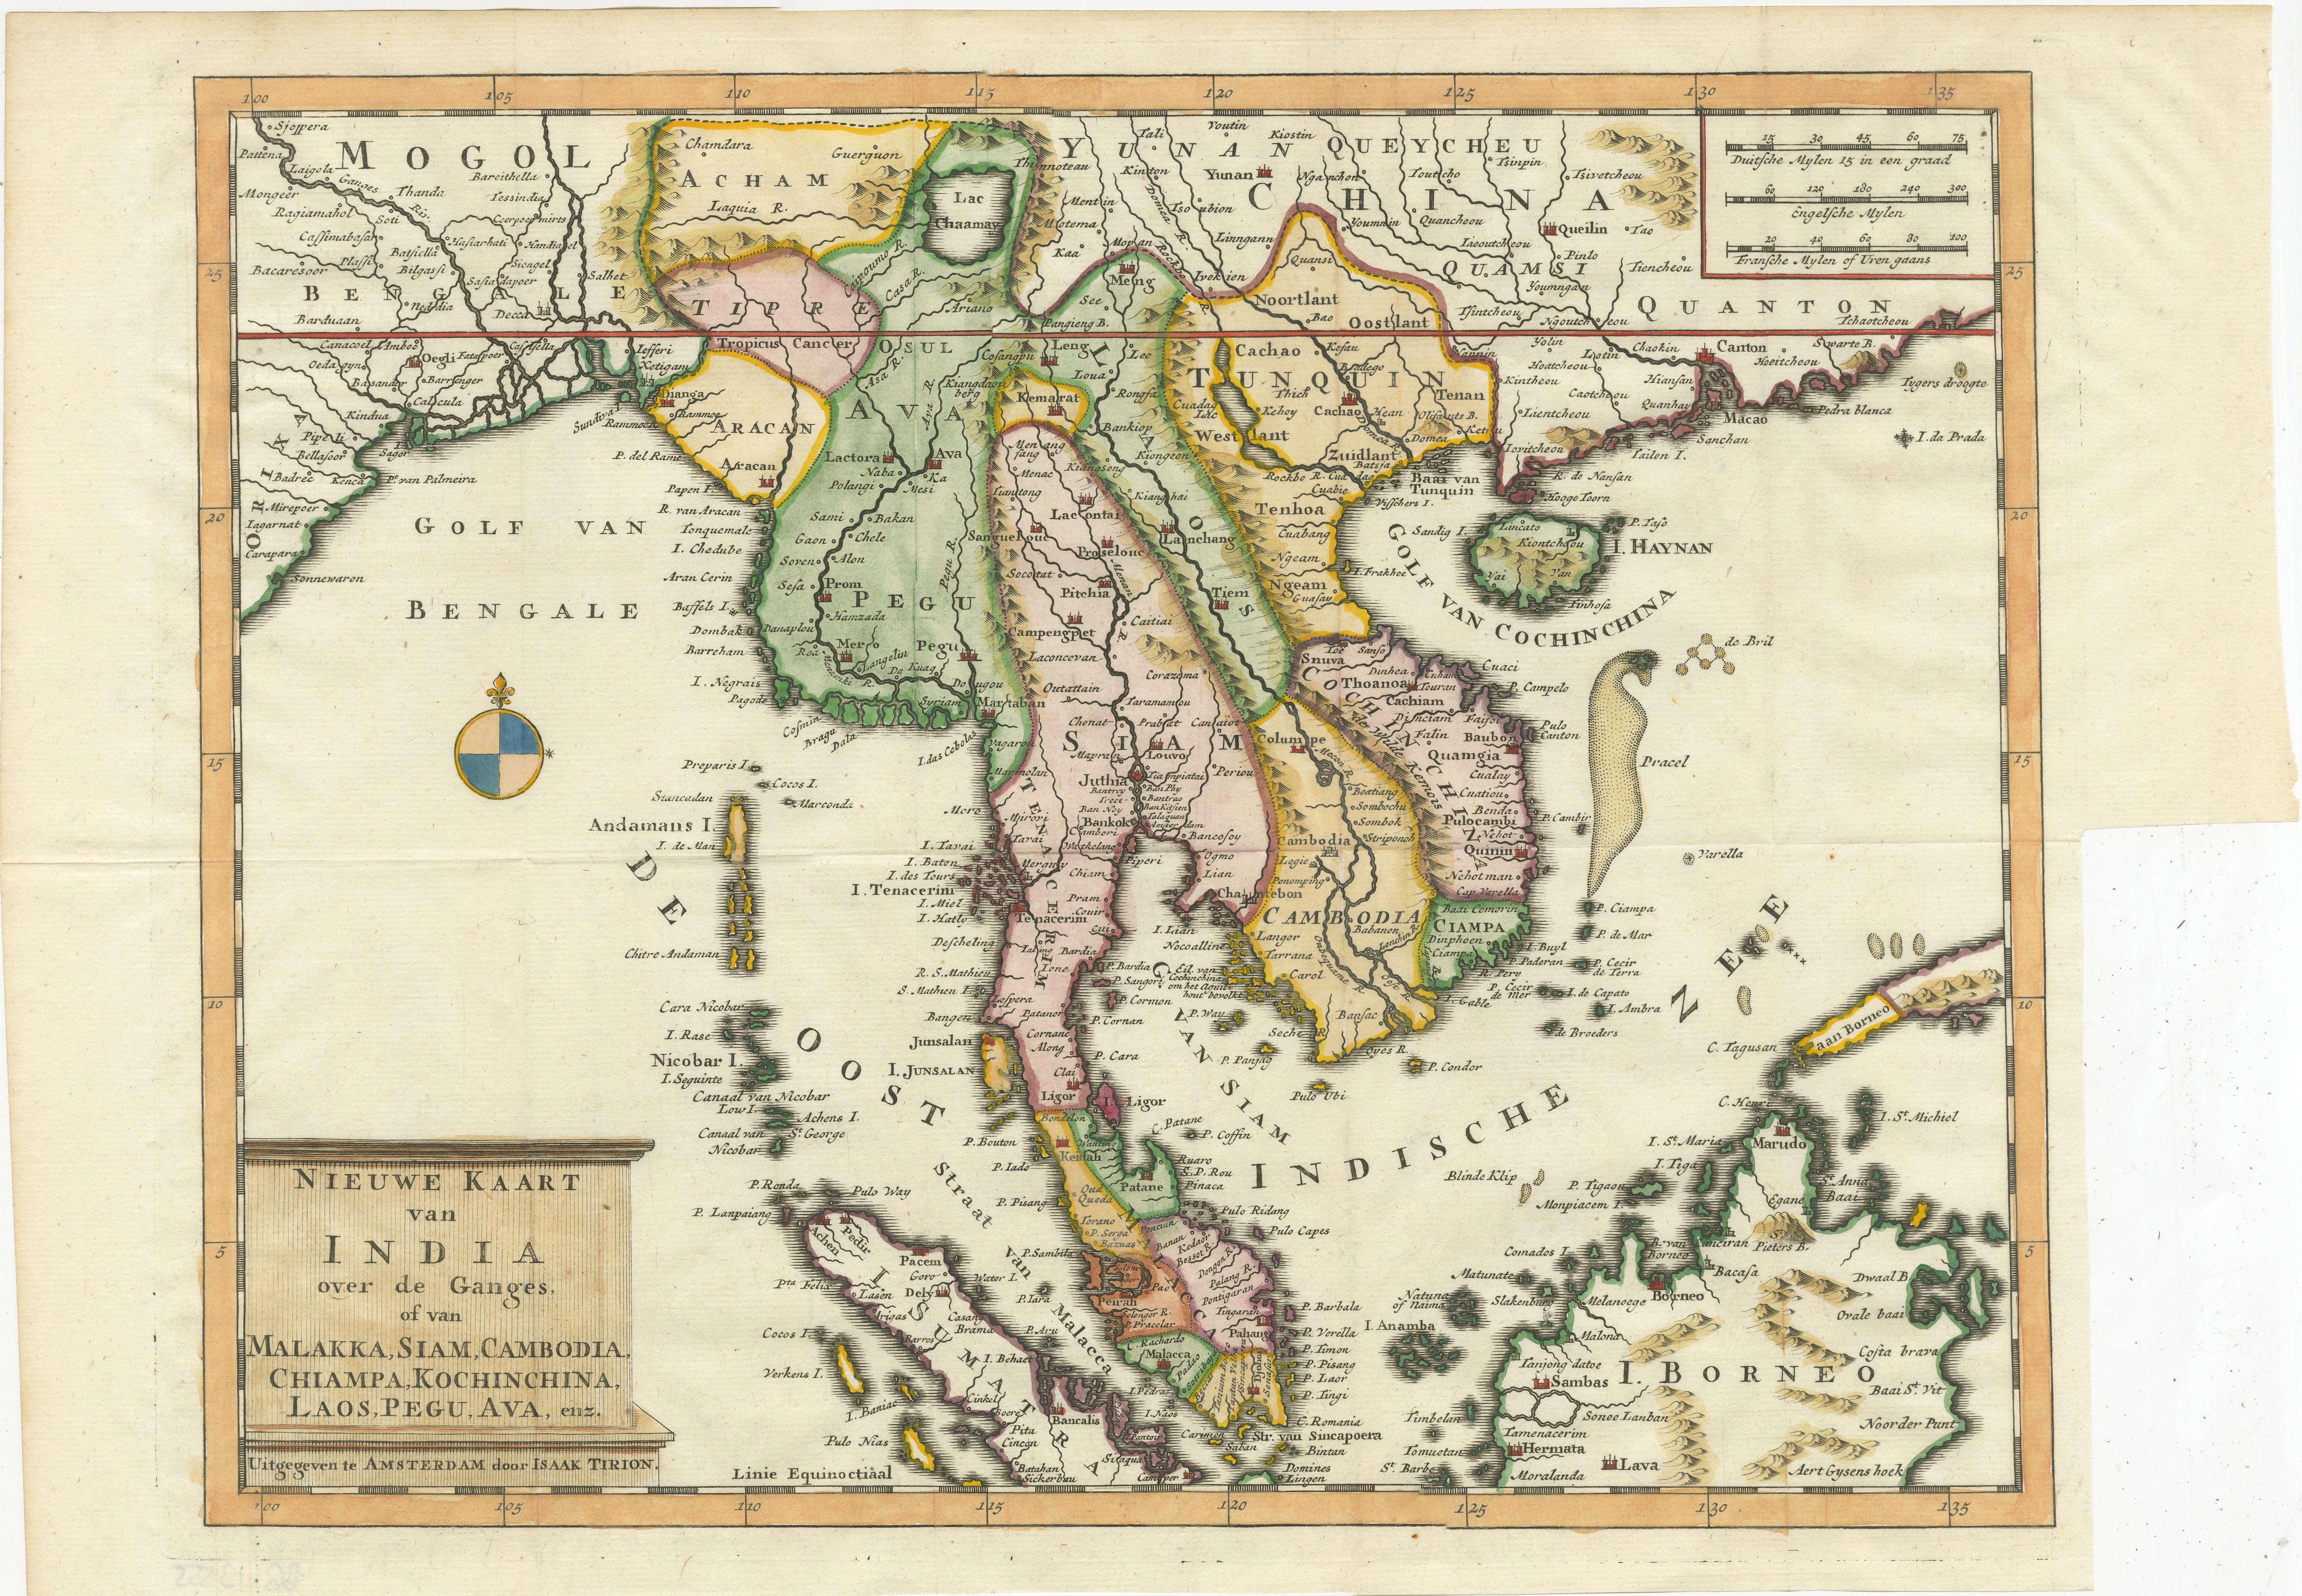 Antique map titled 'Nieuwe Kaart van India over de Ganges of van Malakka, Siam, Cambodia, Chiampa, Kochinchina, Laos, Pegu, Ava, enz'. Original old map of Indochina, the Malaysian Peninsula and the northern parts of Sumatra and Borneo. The mythical